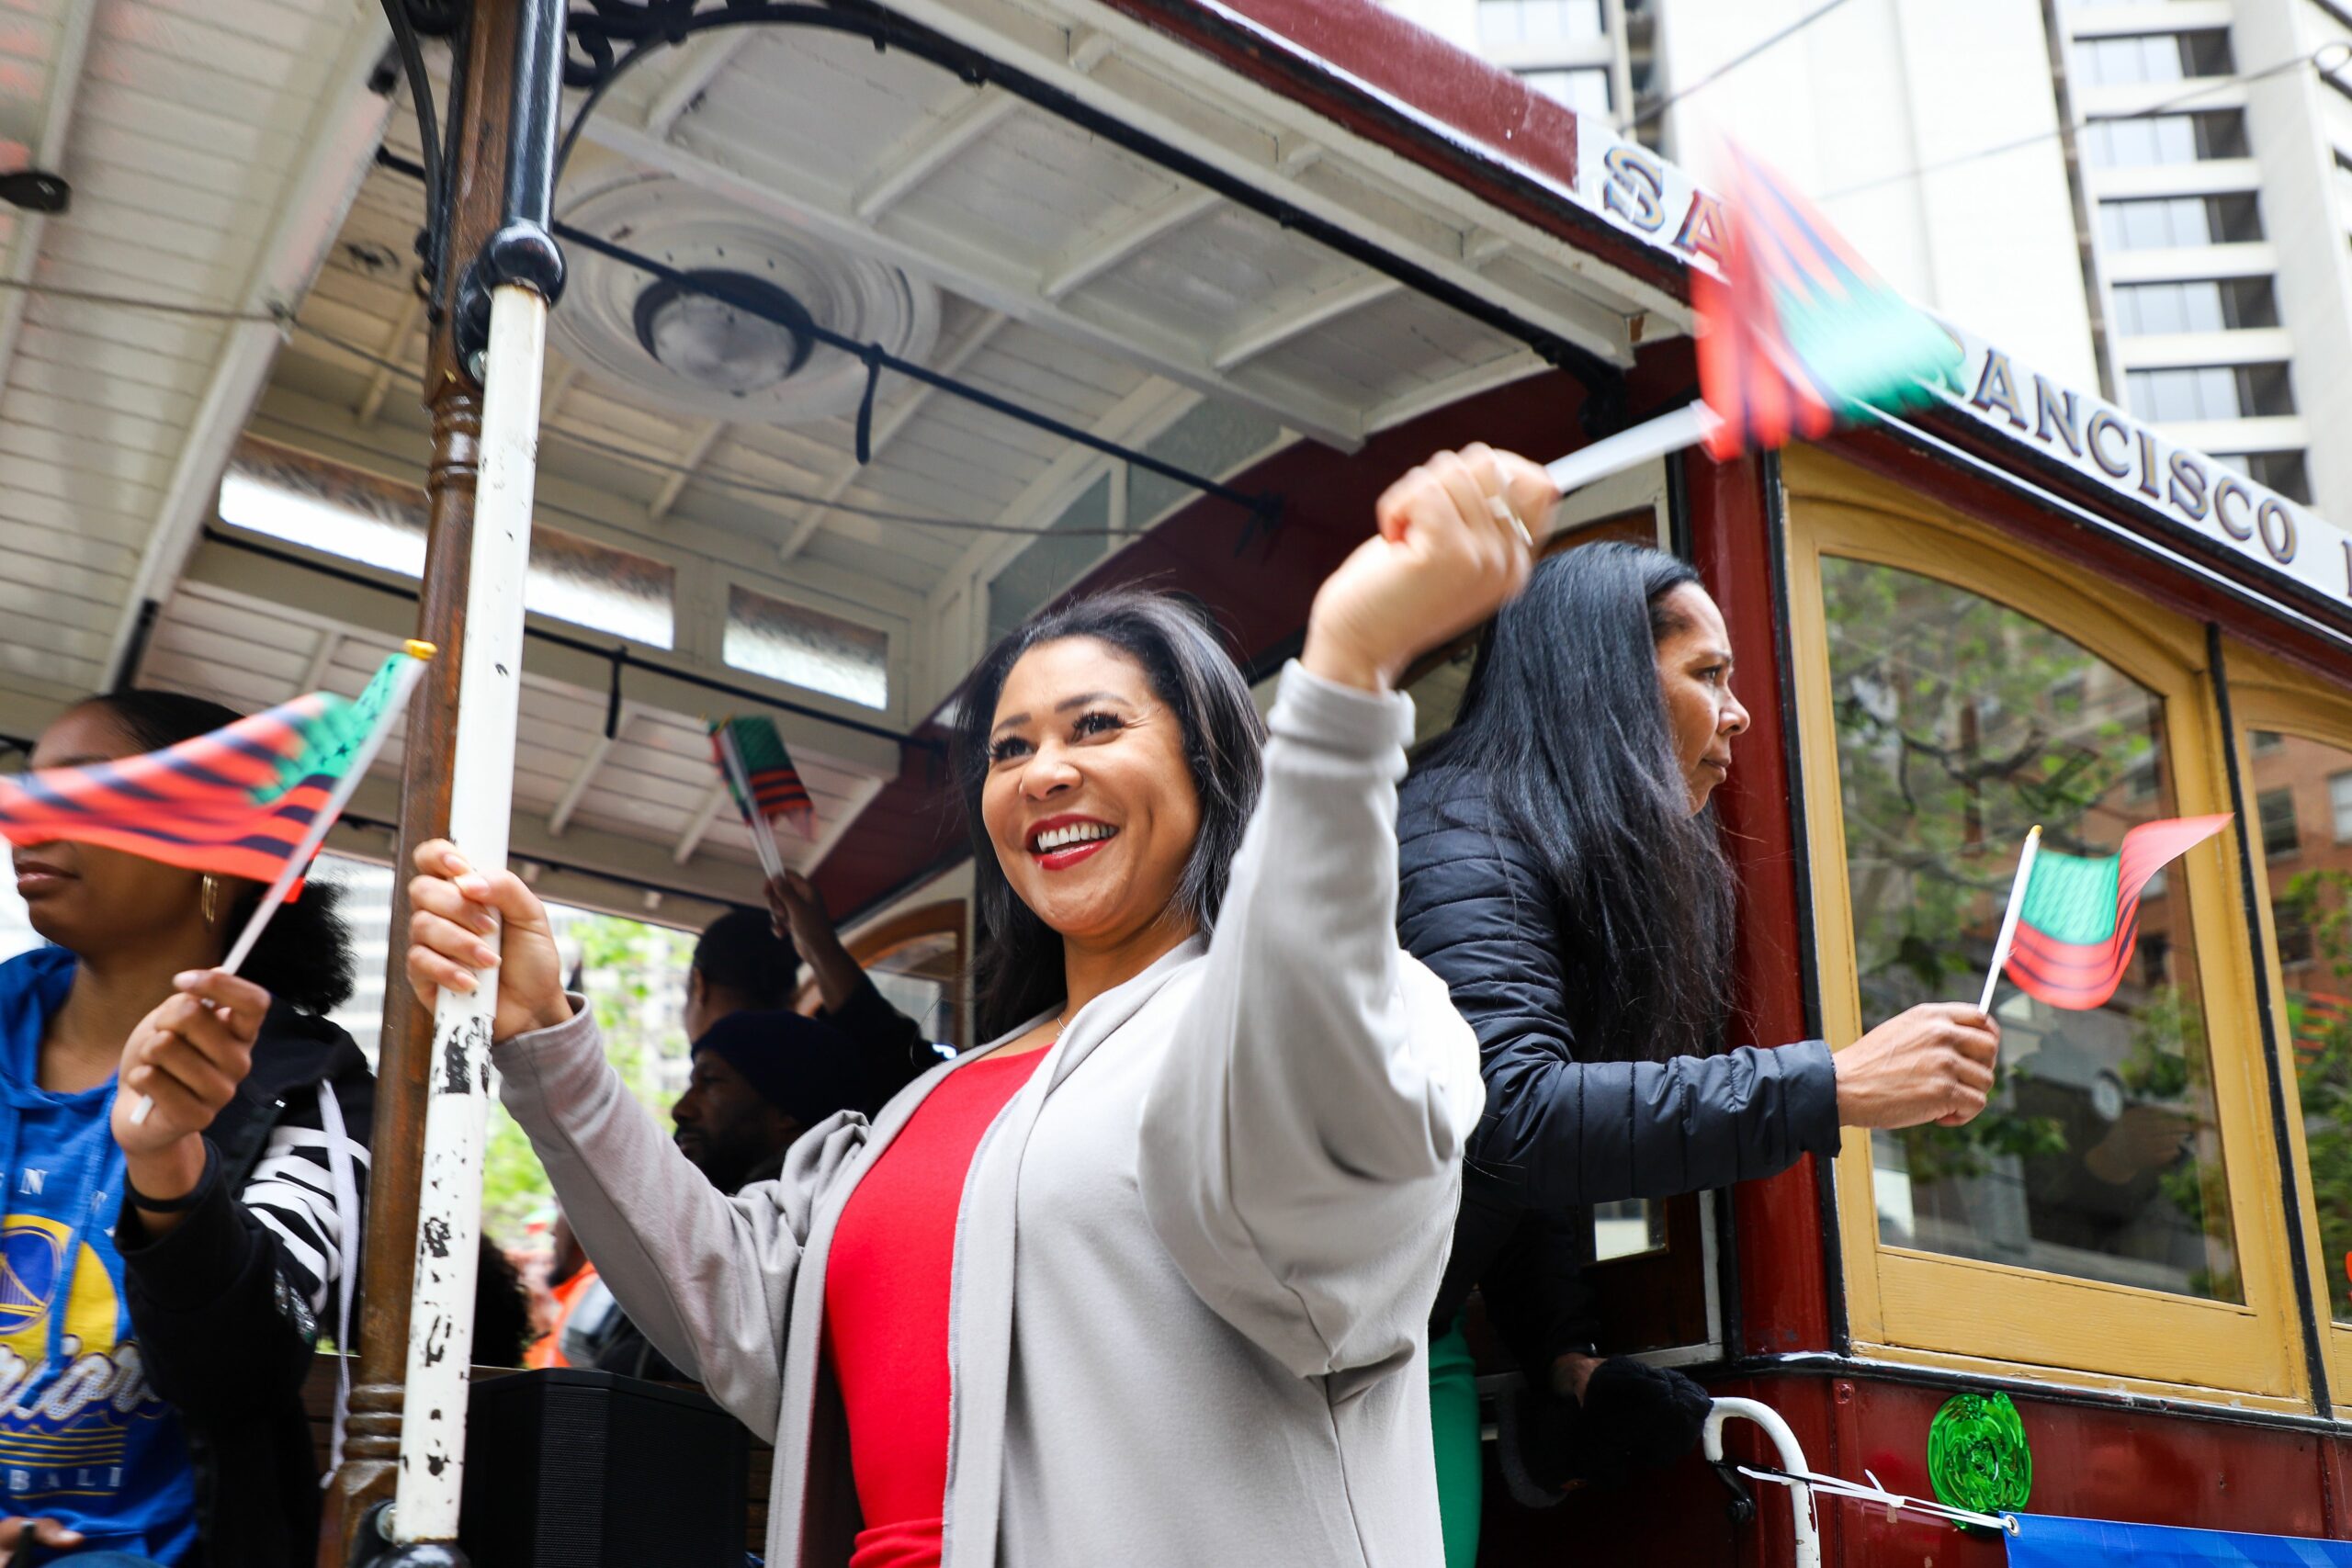 People are waving small flags joyfully on a San Francisco cable car.